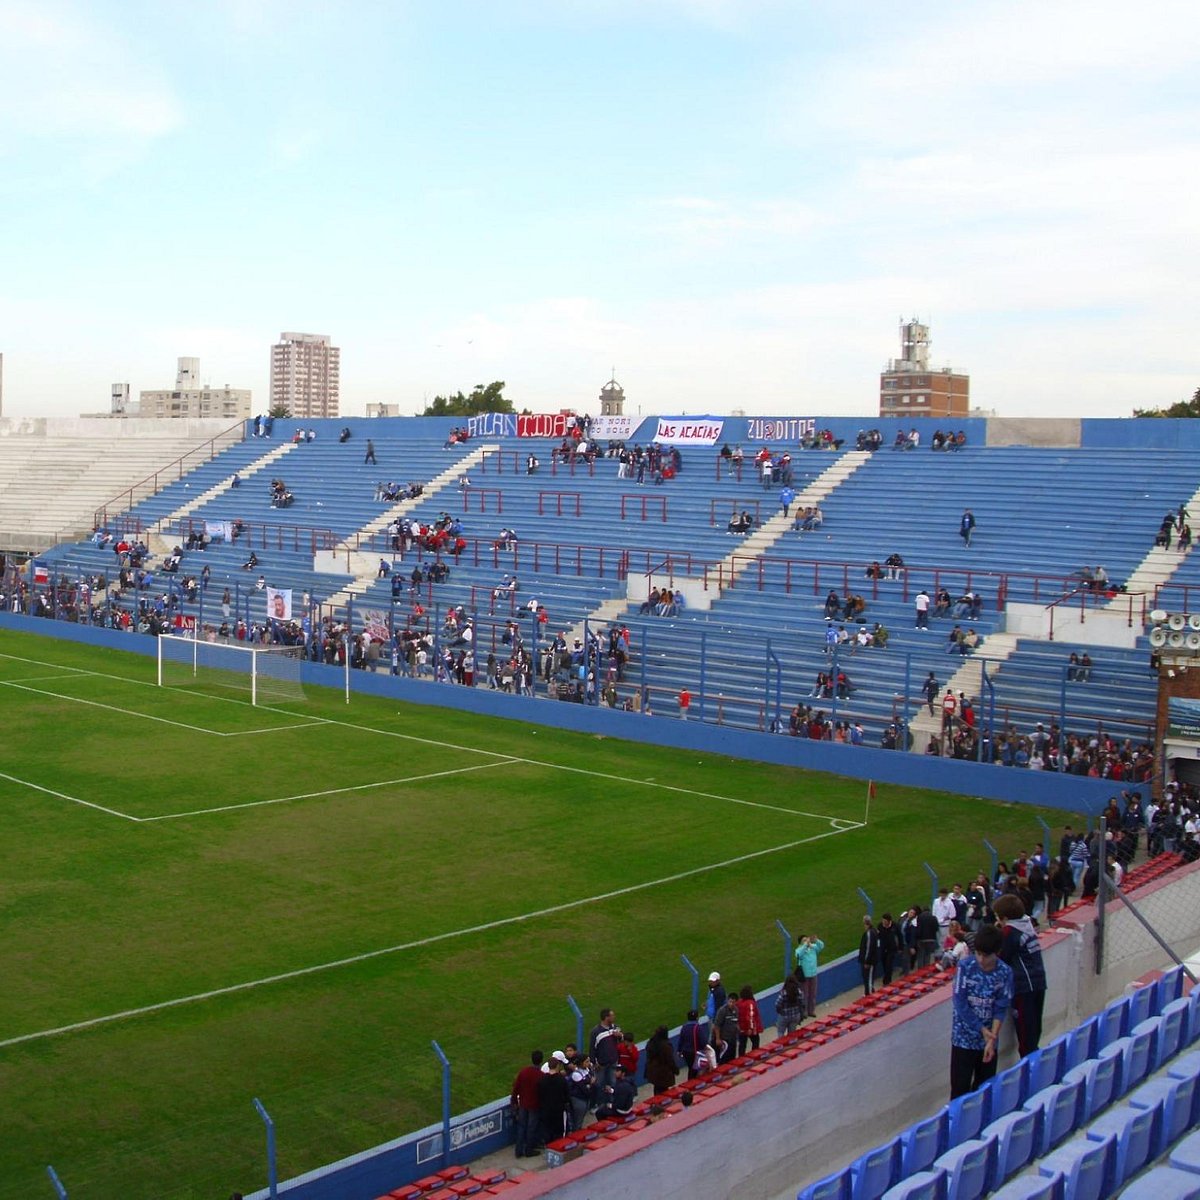 Plaza Colonia Reserves x Racing Club Montevideo Reserves